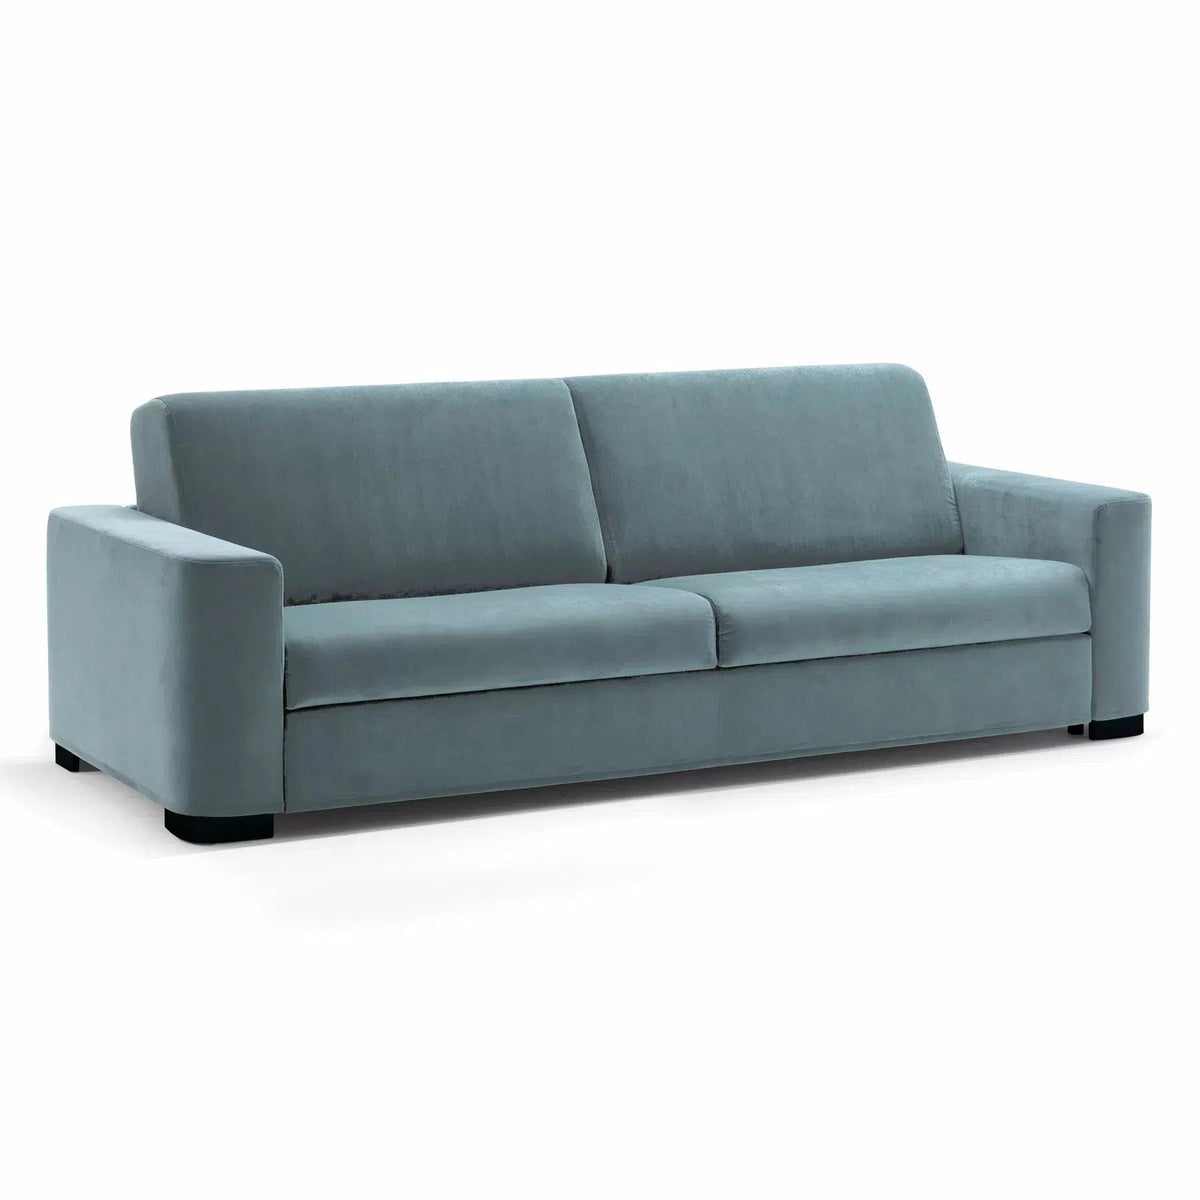 Hans 929 Sofa Bed-TM Leader-Contract Furniture Store